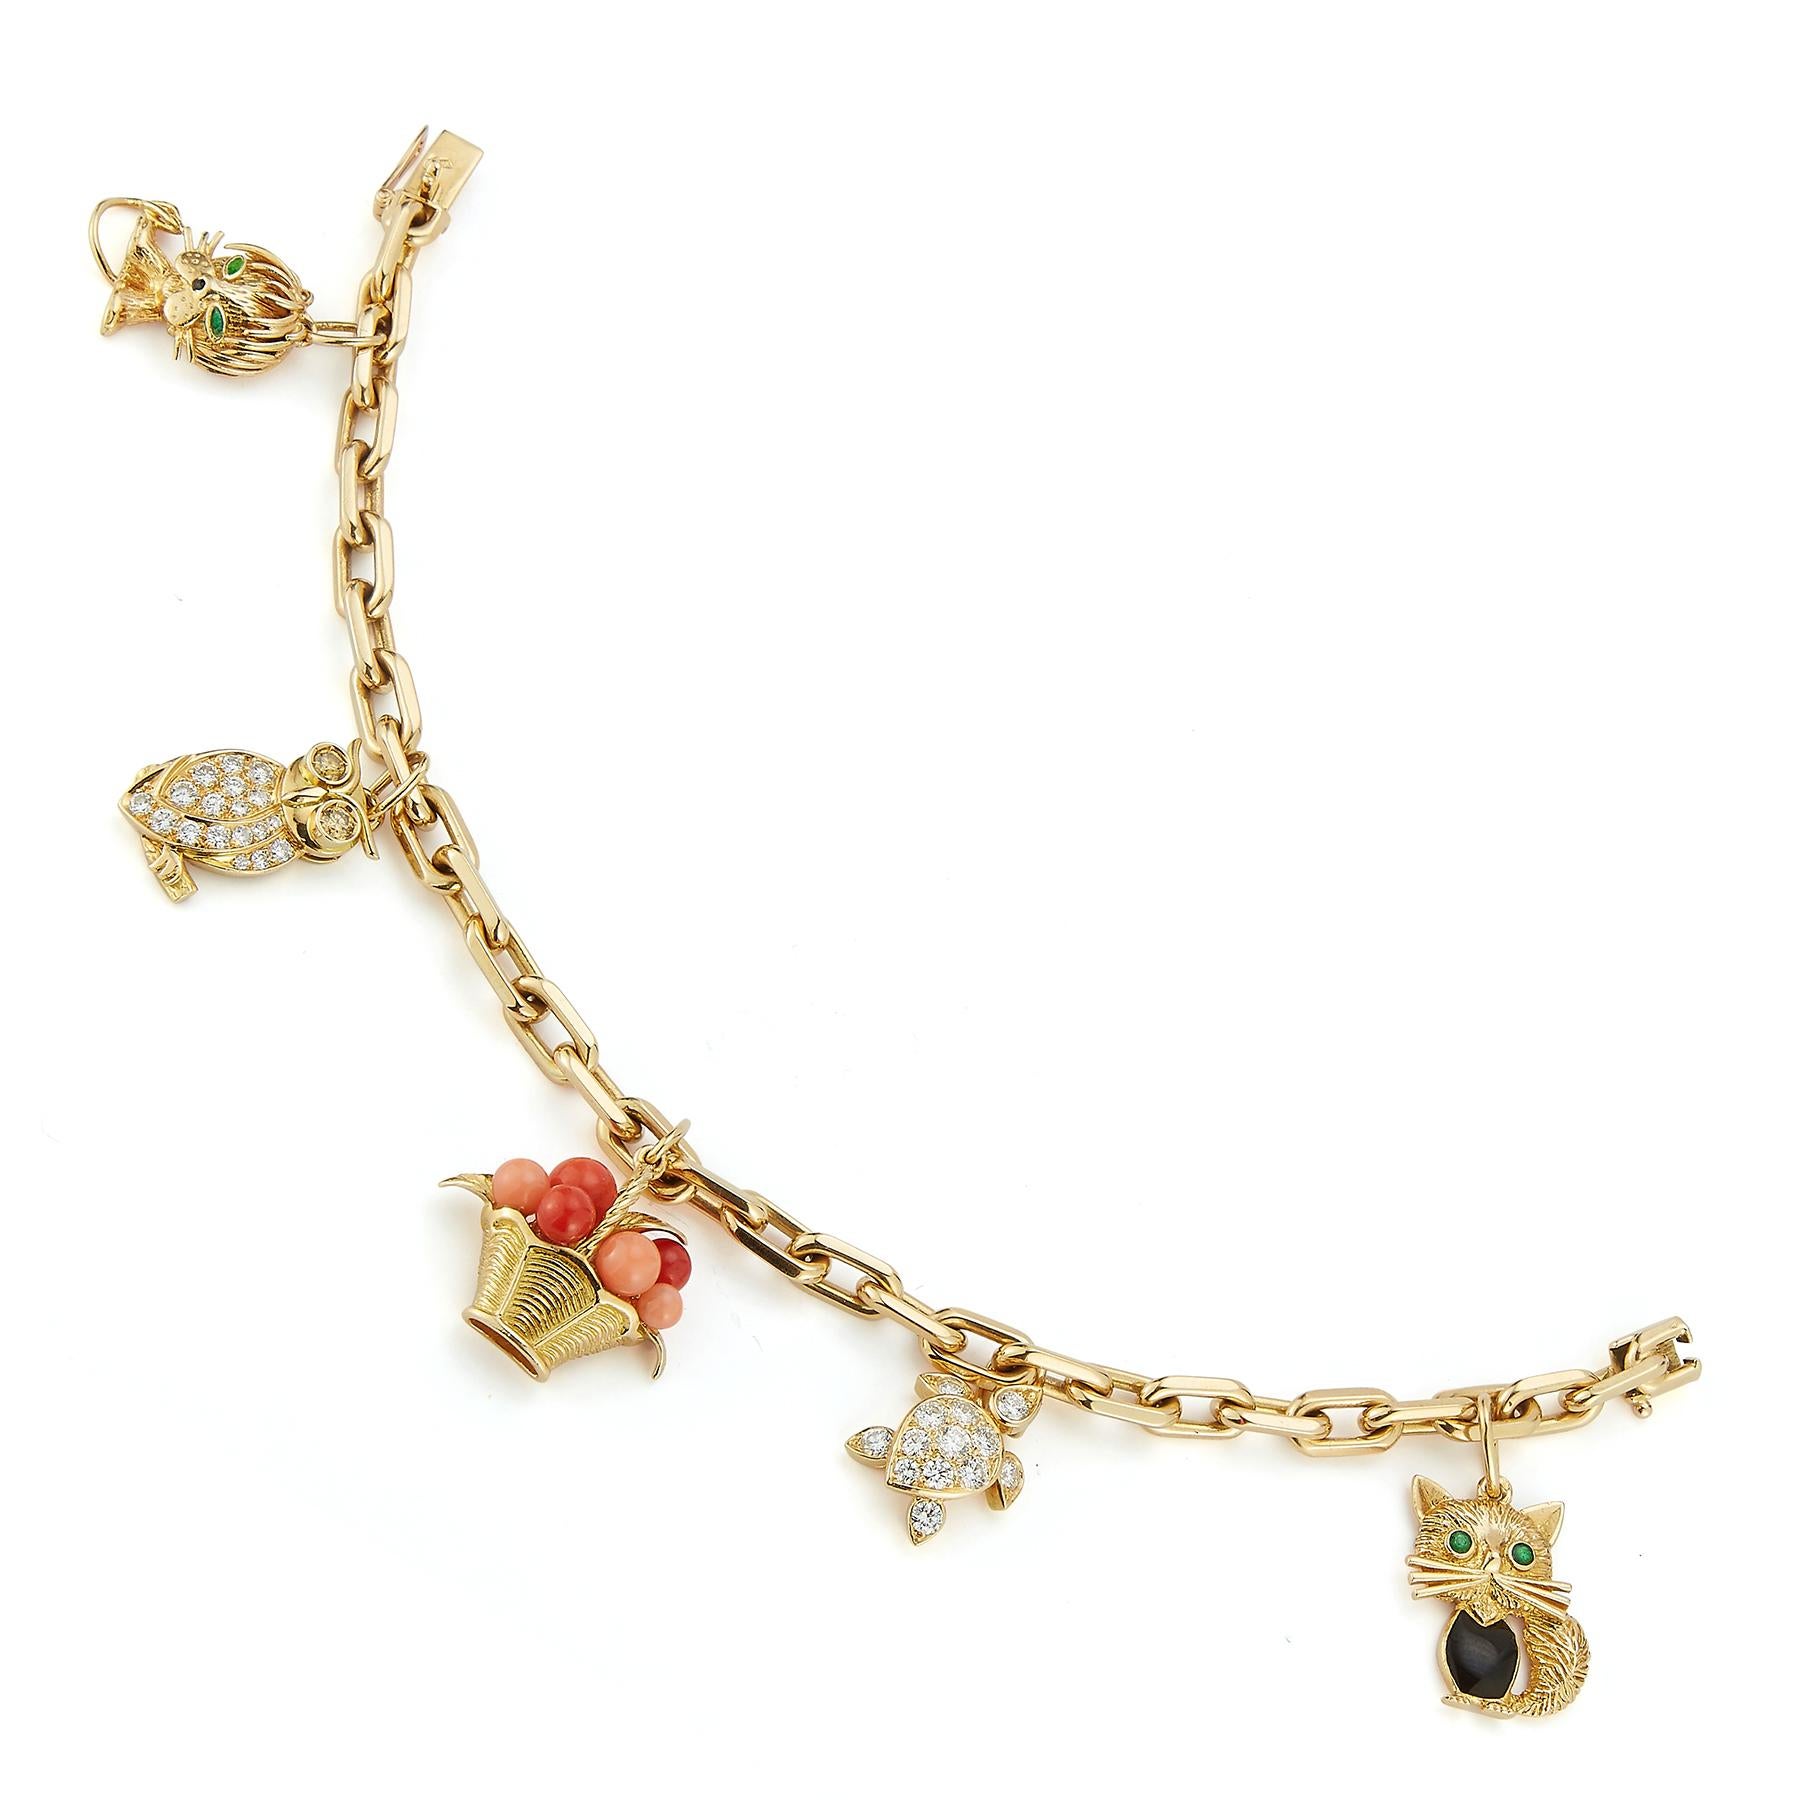 Van Cleef & Arpels Diamond & Gold Charm Bracelet

5 charms consisting of a kitten, turtle basket of oranges, owl  & a lion.

Set with diamonds, coral, emerald & onyx set in 18k yellow gold.

The two diamonds charms are not signed

Measurements: 7.5